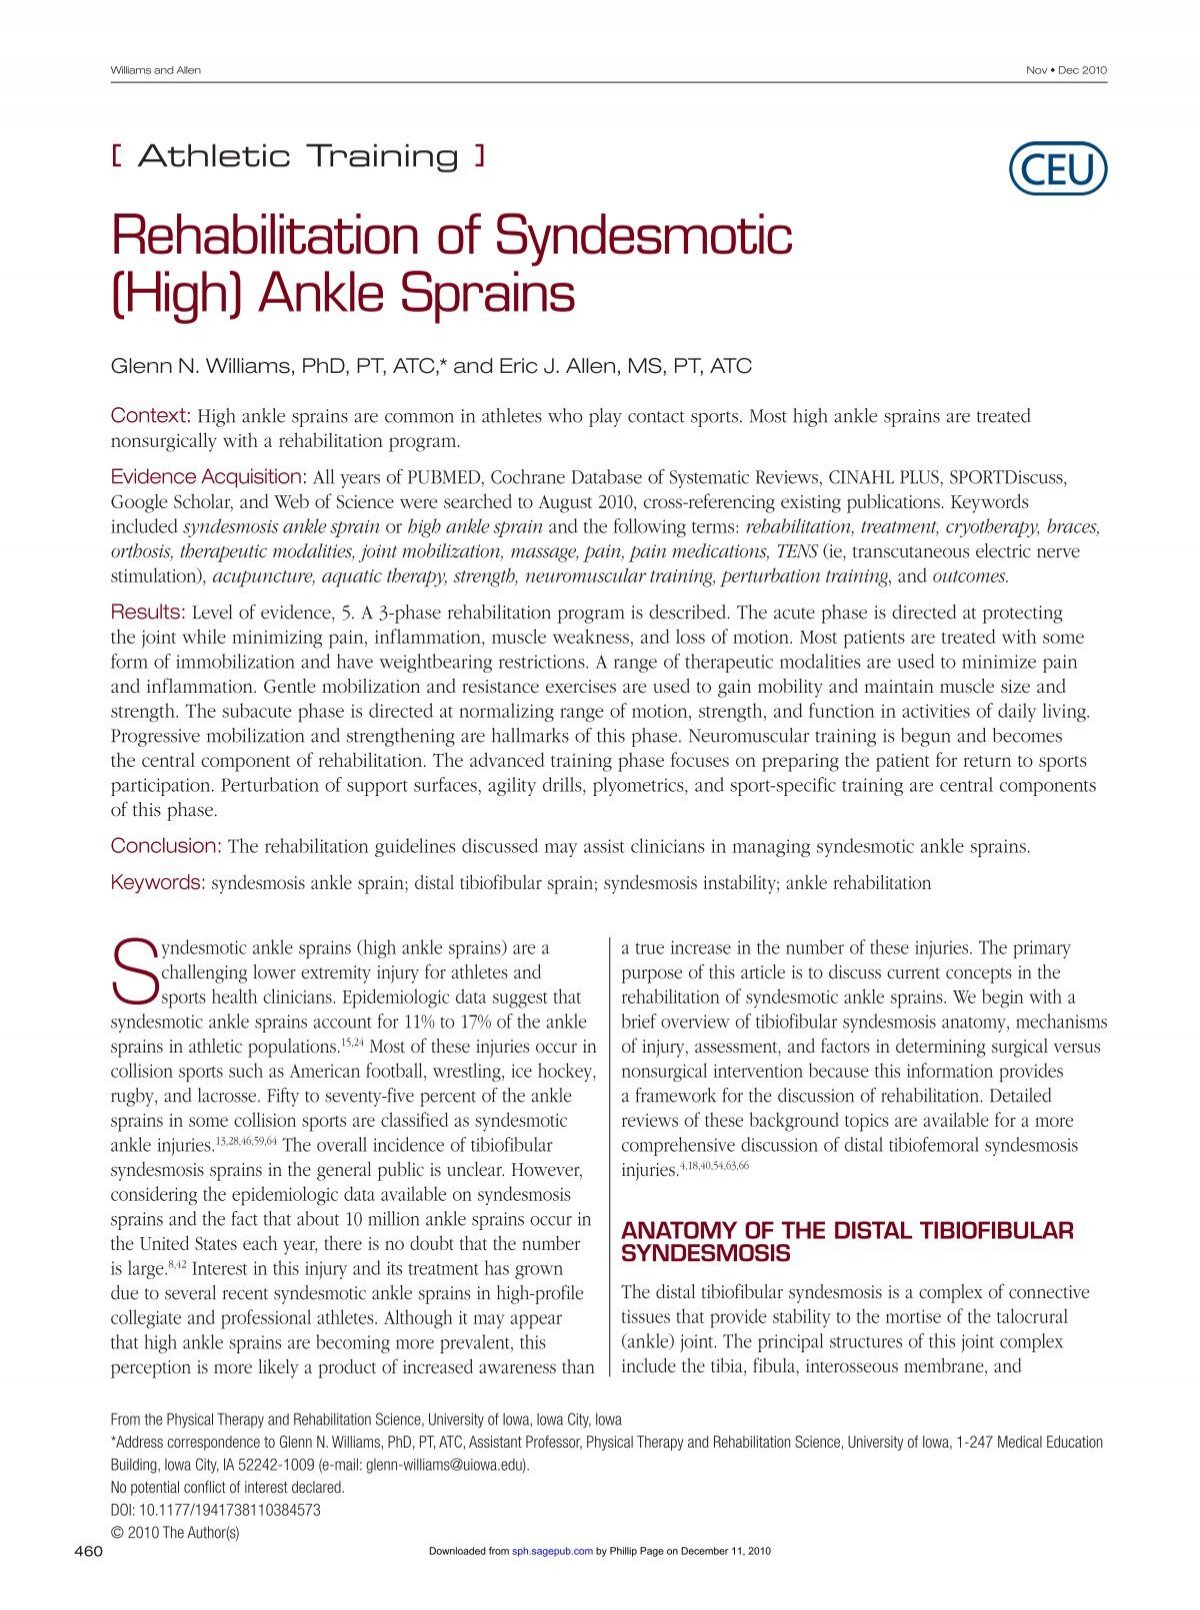 Rehabilitation of Syndesmotic (High) Ankle Sprains